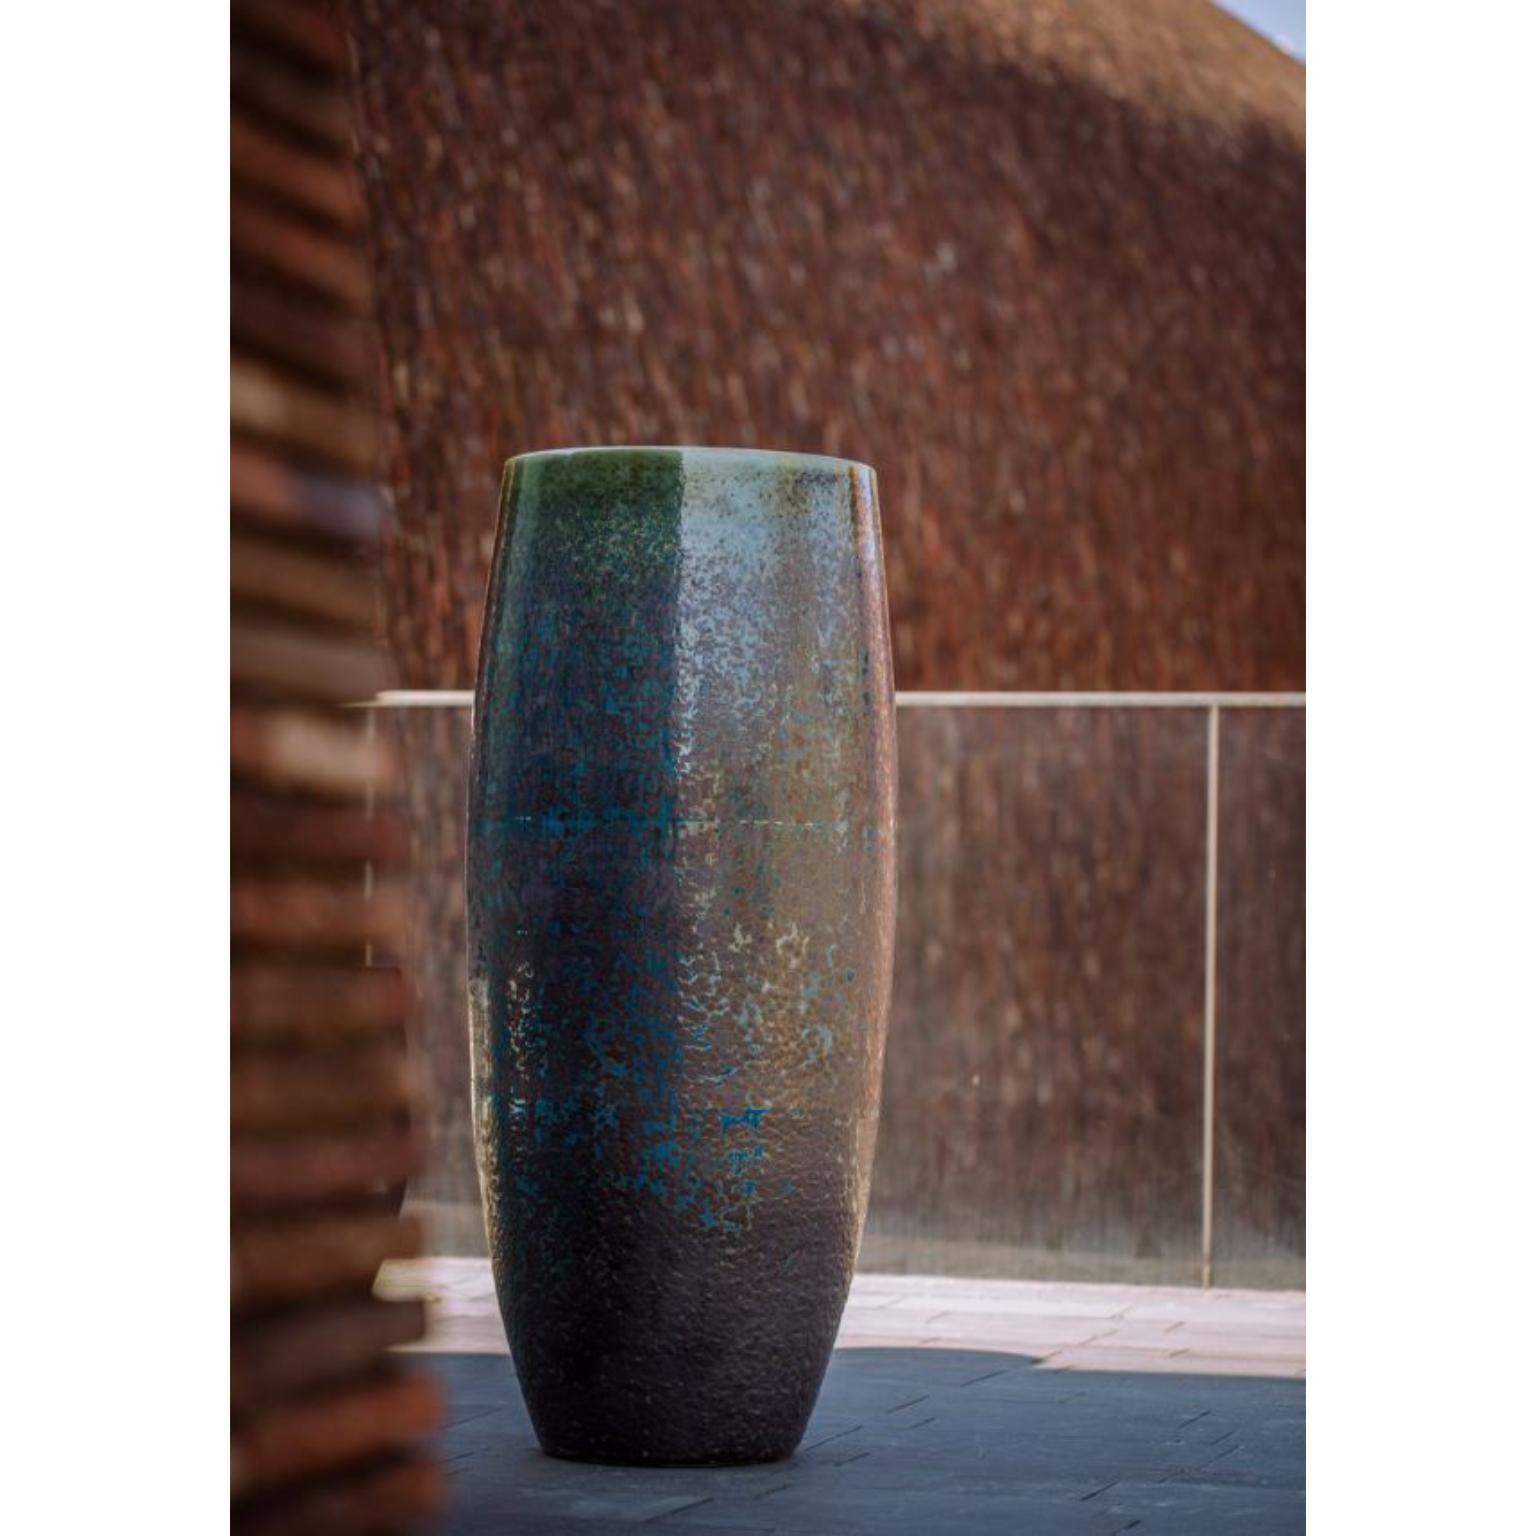 Elements Planters M by WL Ceramics
Designer: WL Ceramics
Materials: Porcelain
Dimensions: H120 x Ø55 cm

With their minimal yet elegant forms, the ELEMENTS PLANTERS are designed as a canvas for the many beautiful glazes that we have in our